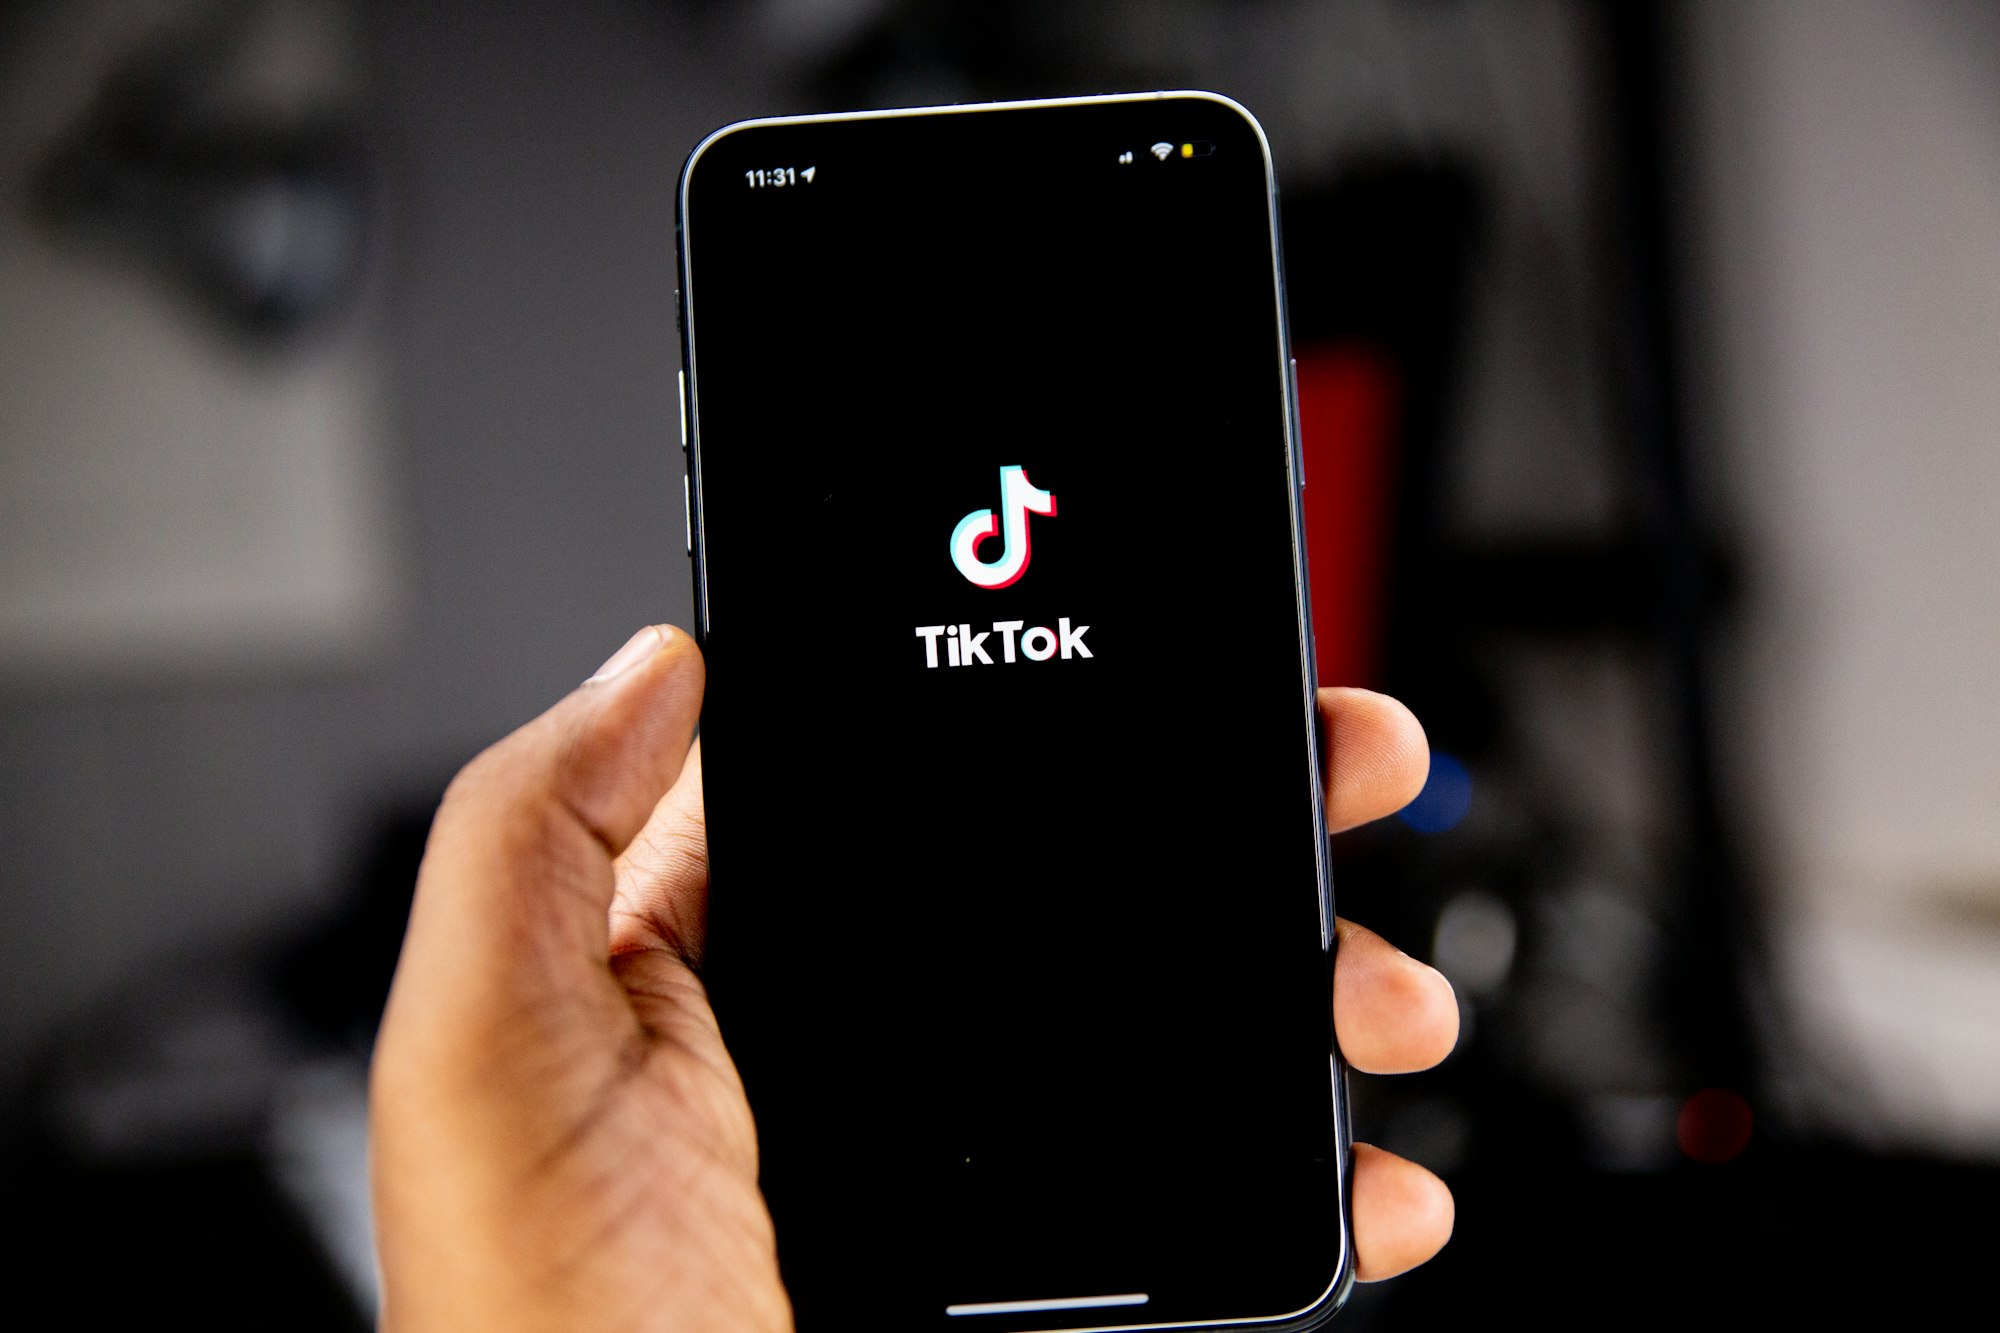 Know a minor who used TikTok? Submit a claim for cash by Saturday July 24.